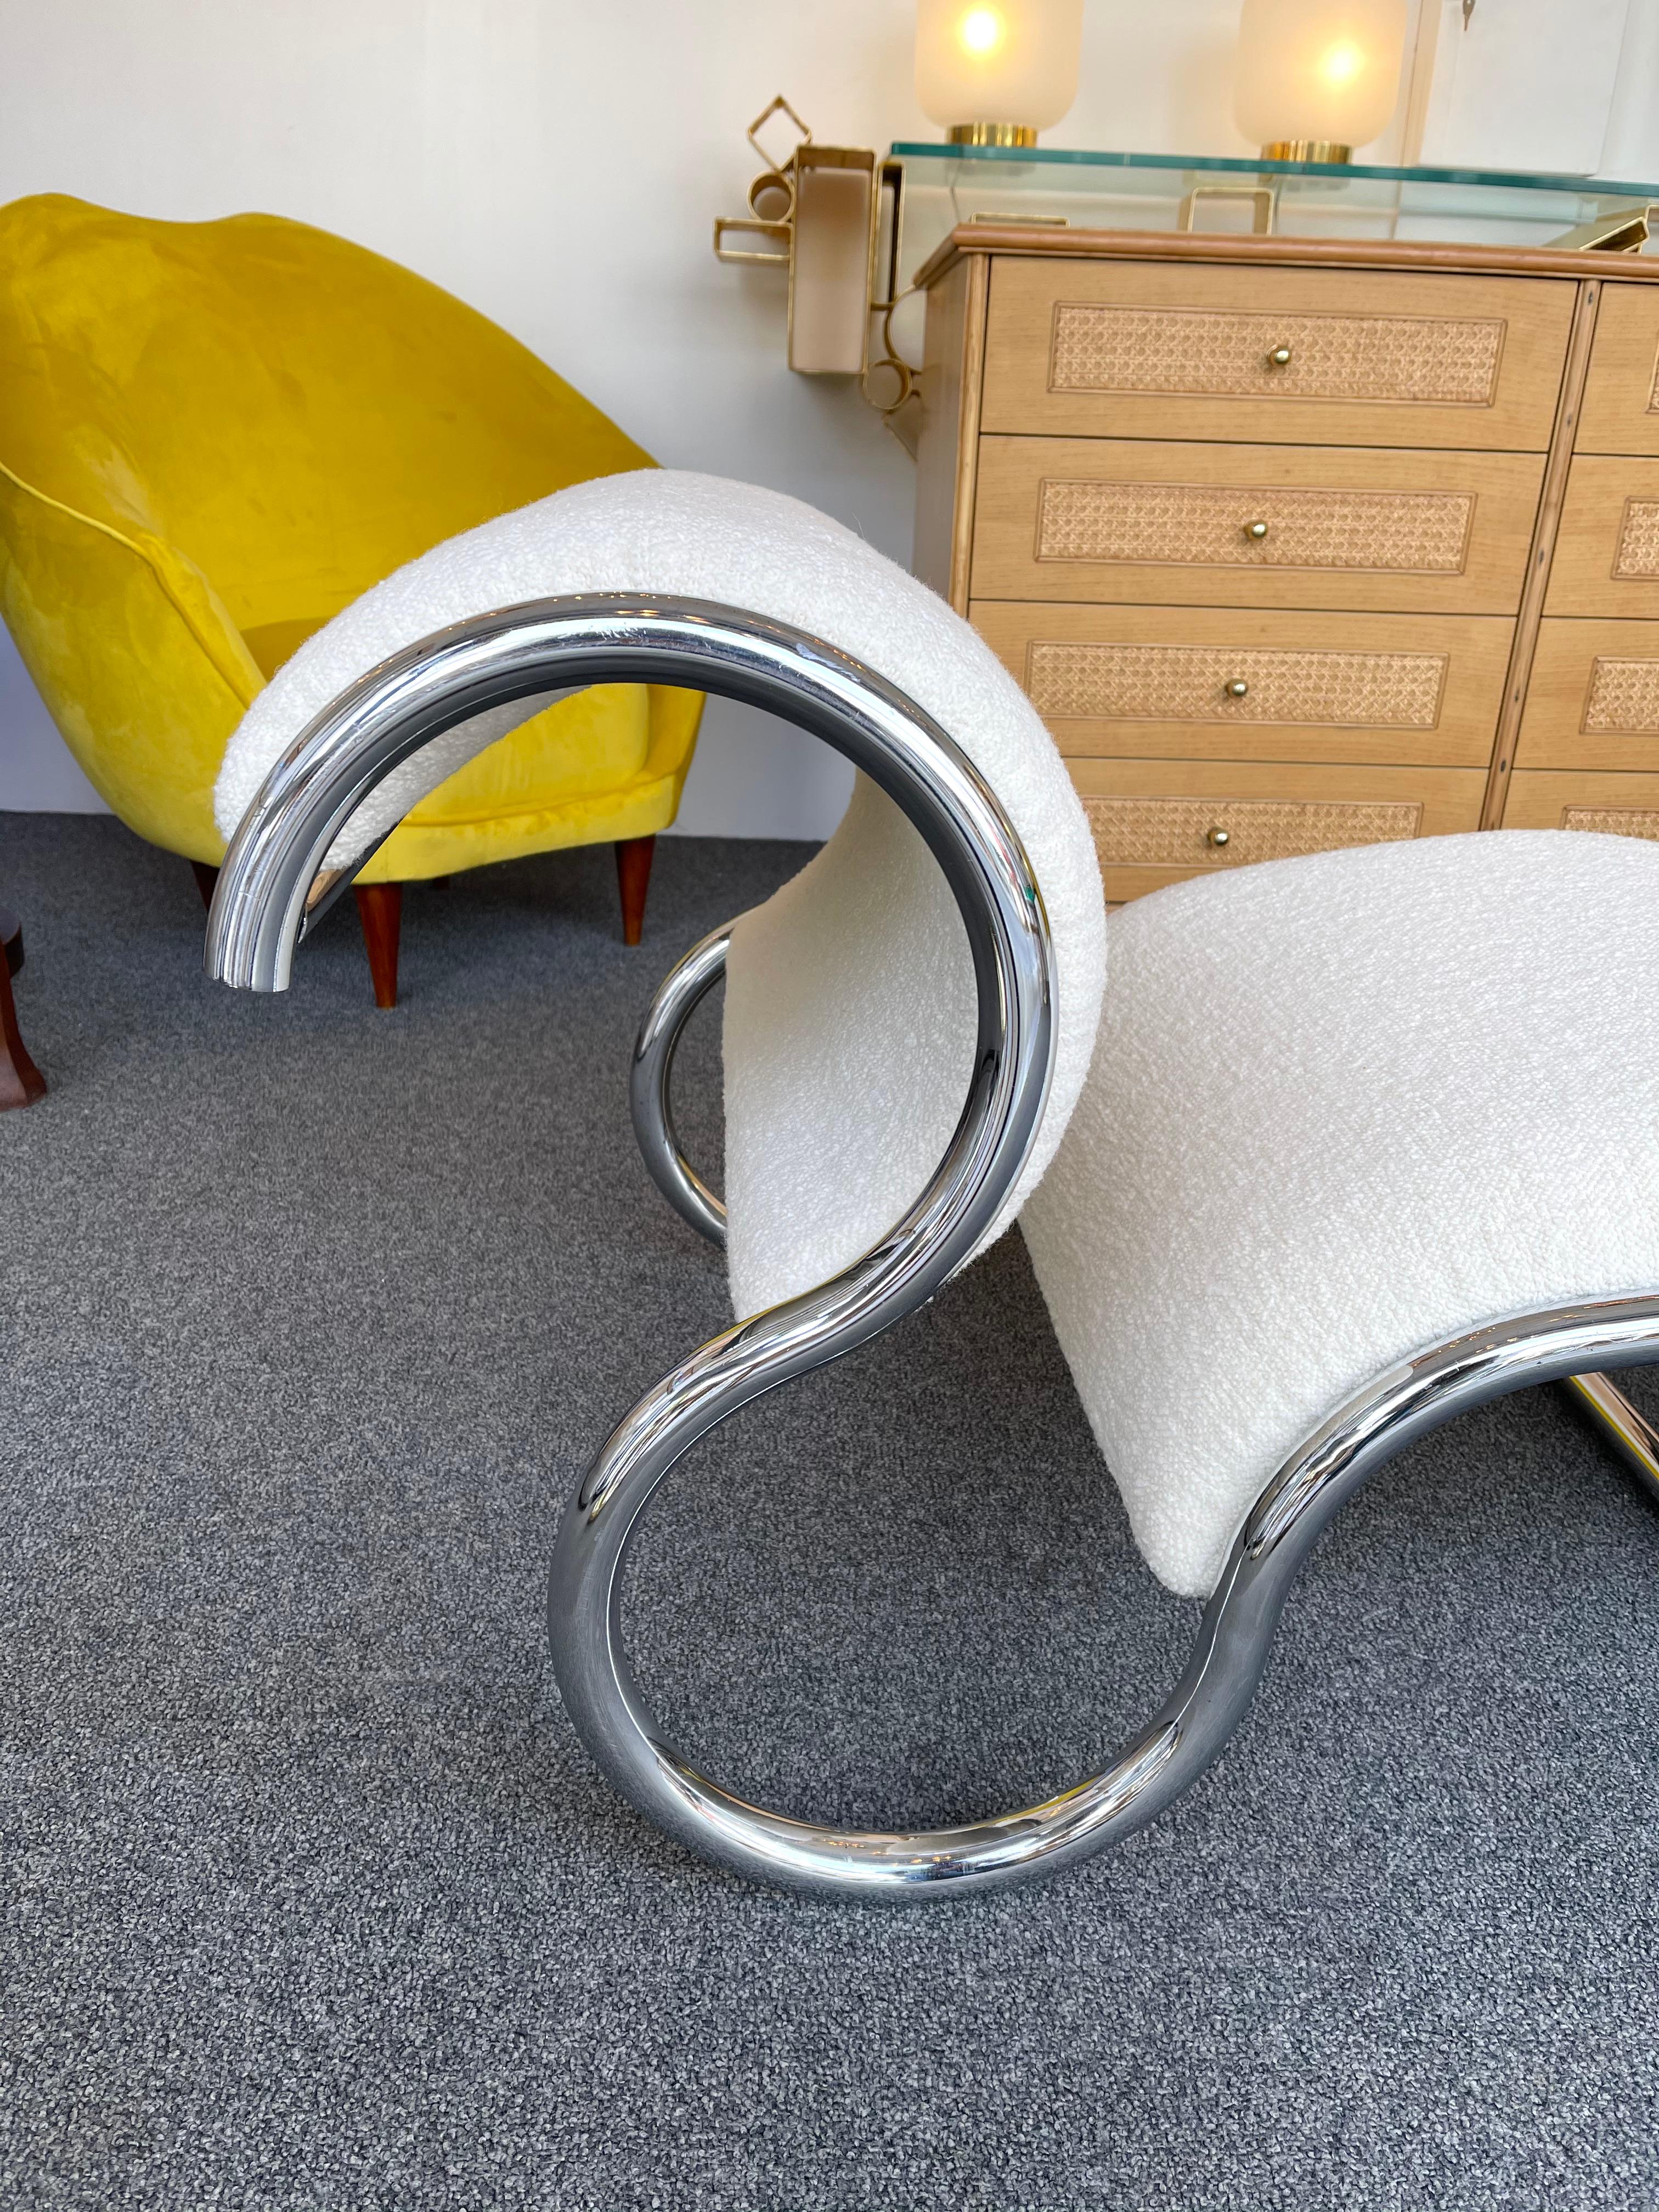 Pair of S design slipper chairs or armchairs in metal chrome by the editor IFF. Fully upholstered with a nice editor bouclé fabric. Famous design like Gio Ponti, Gianfranco Frattini, Cassina, Osvaldo Borsani, Joe Colombo, Vico Magistretti, Ico Luisa